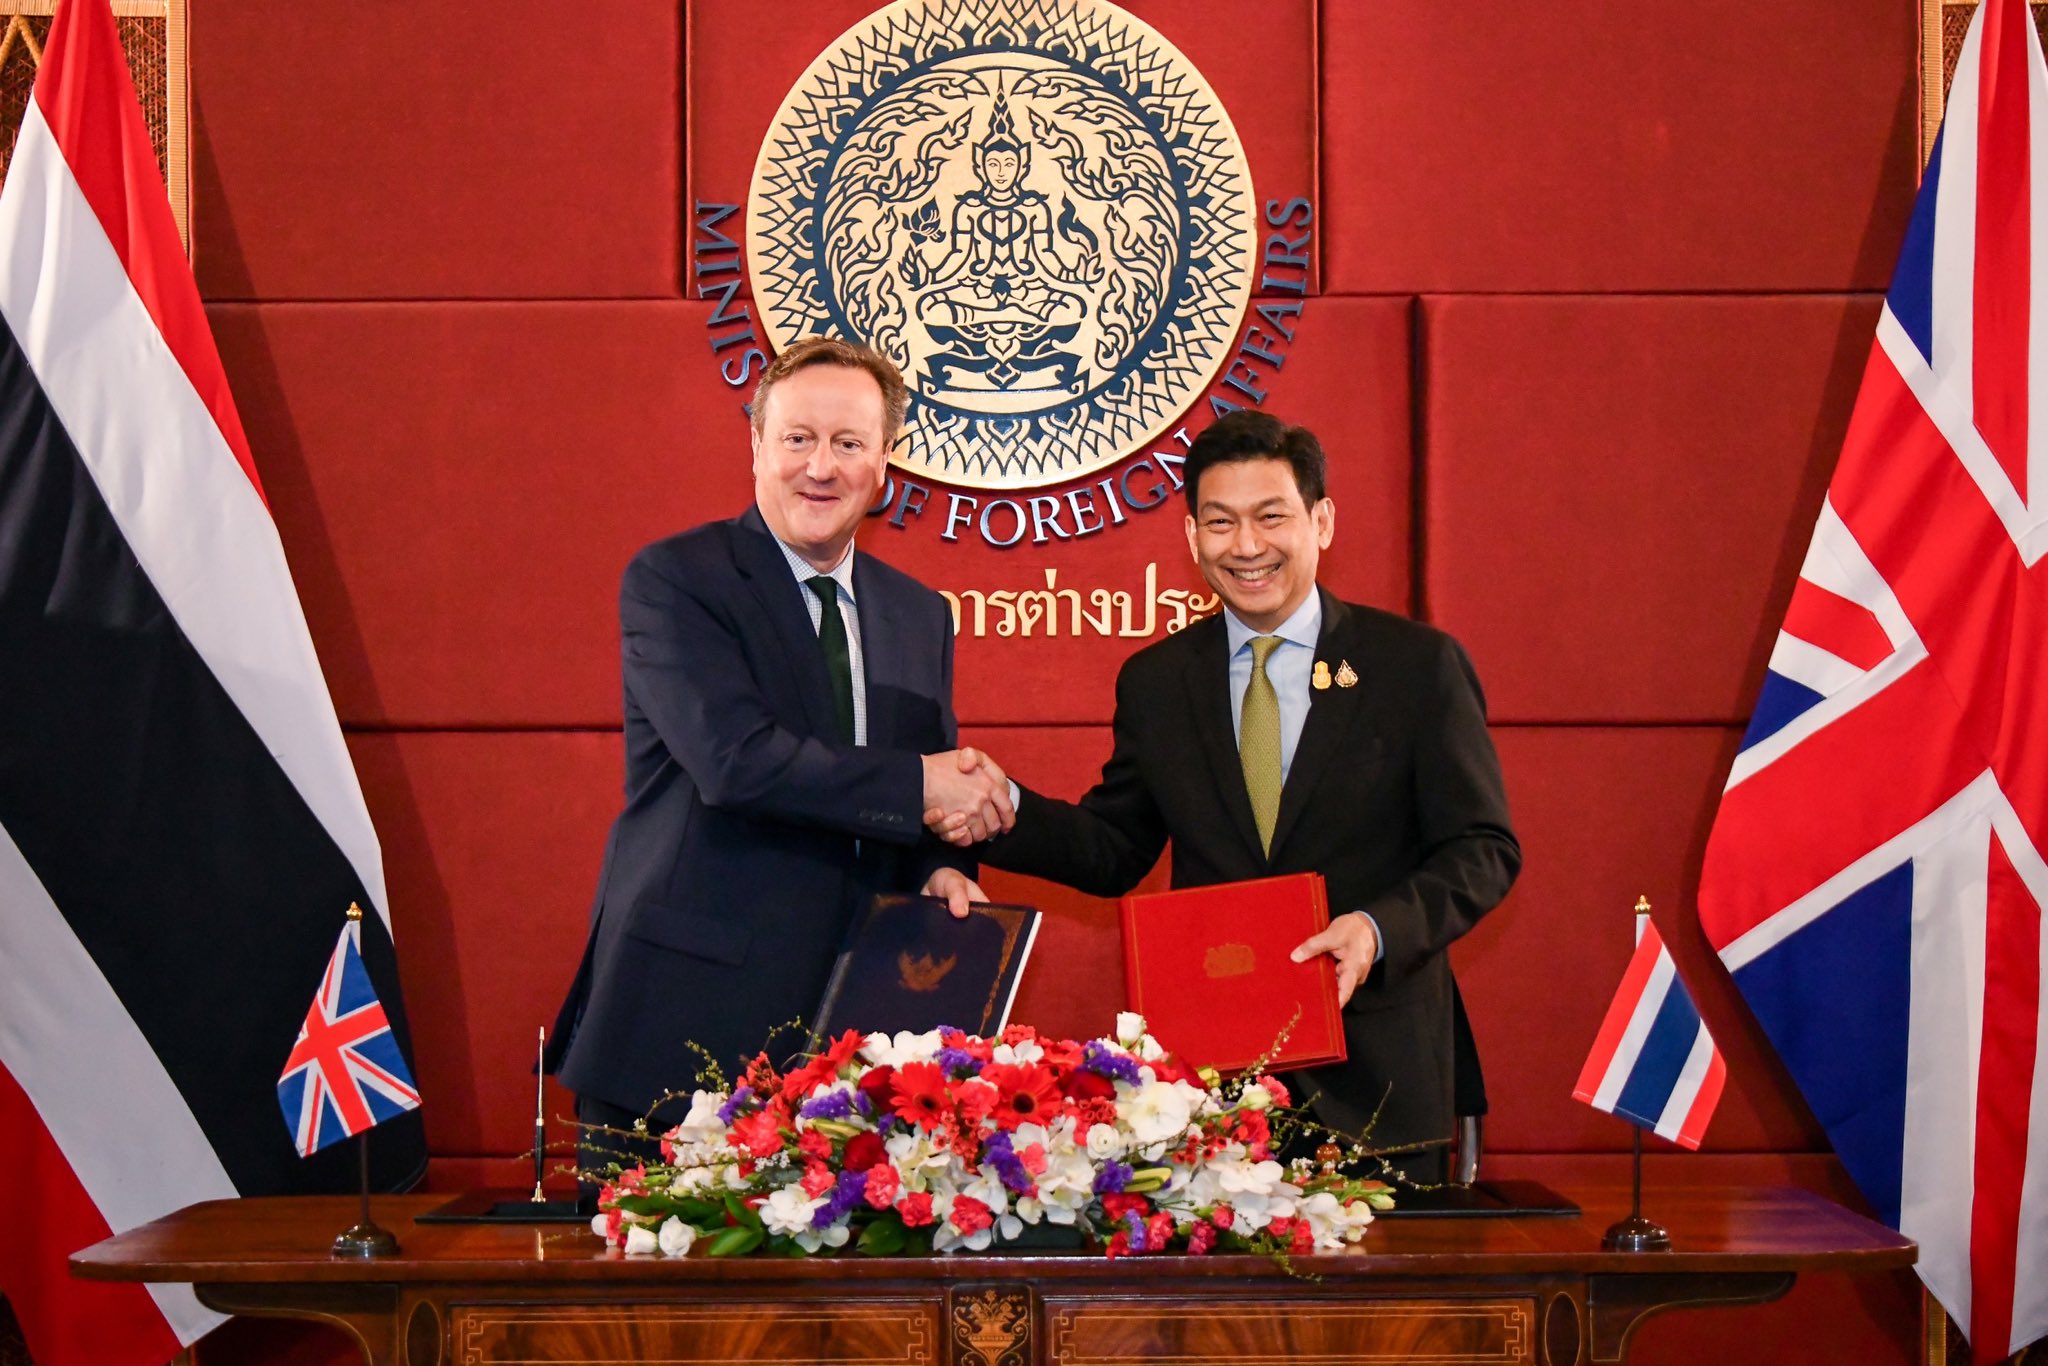 Thailand and the UK Announce the Elevation of Their Relations to Strategic Partnership